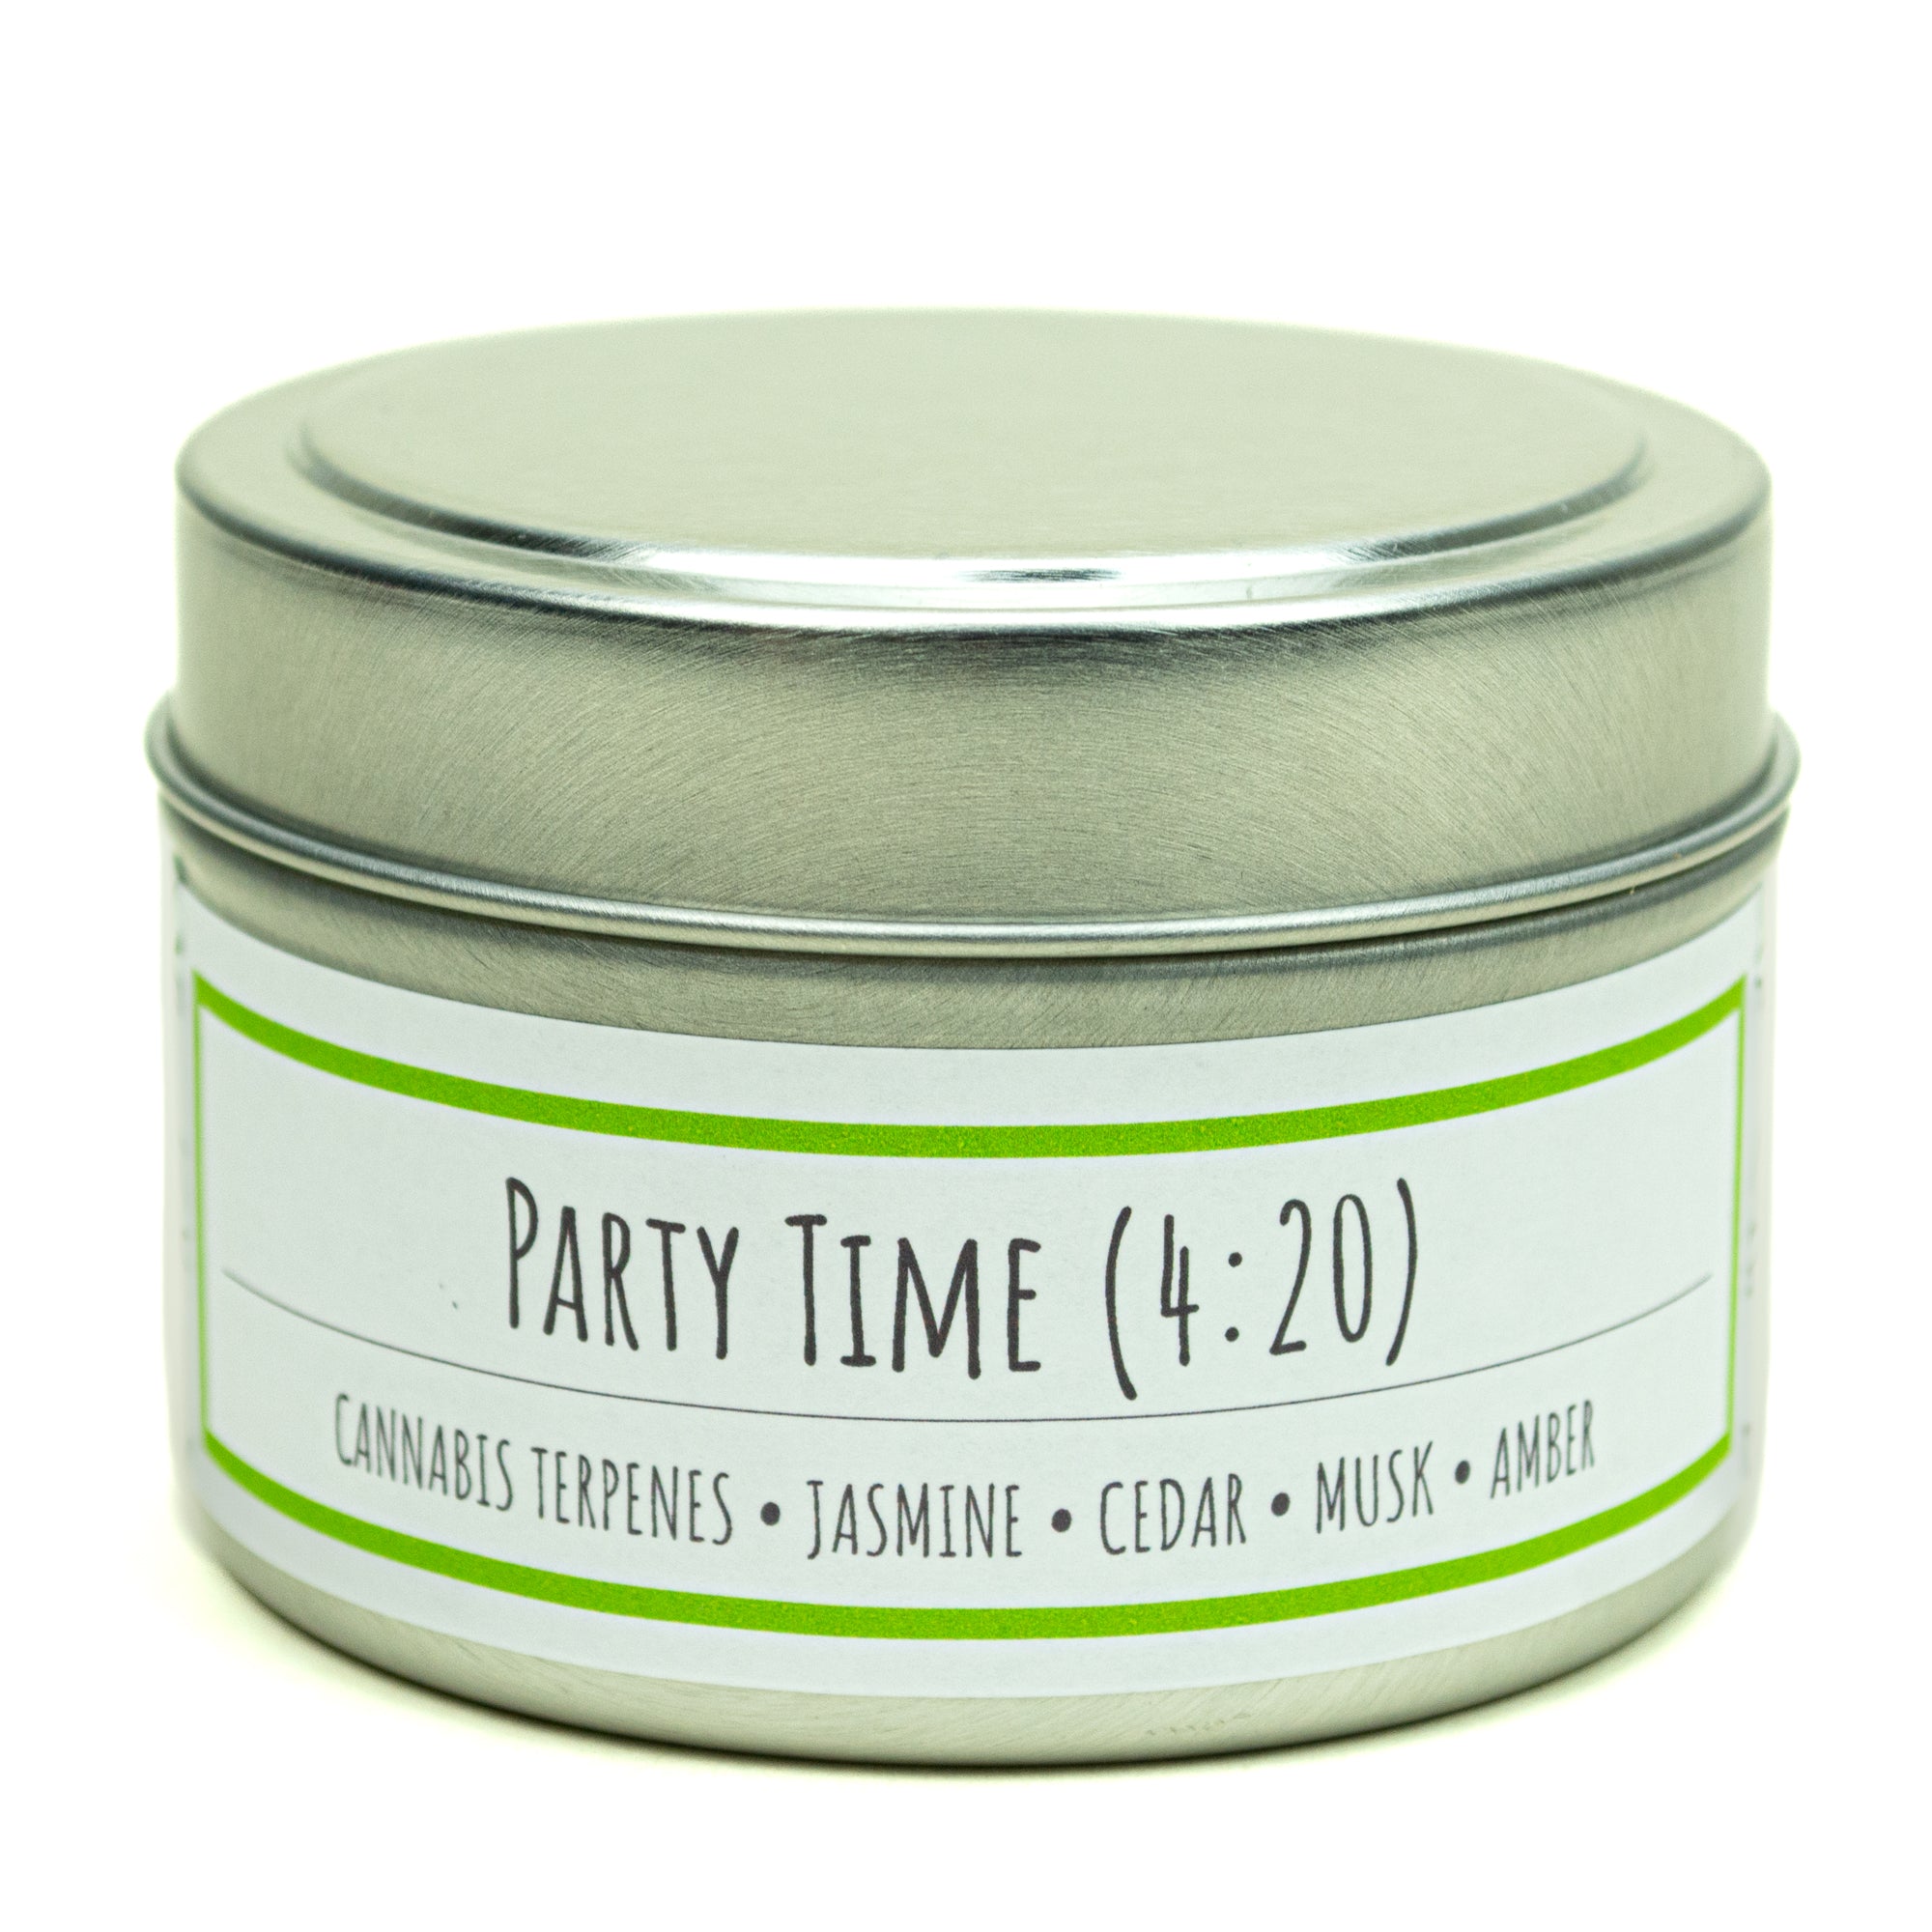 Party Time (4:20) scented 3 oz. soy candle in travel tin - FKA Cannabis Flower